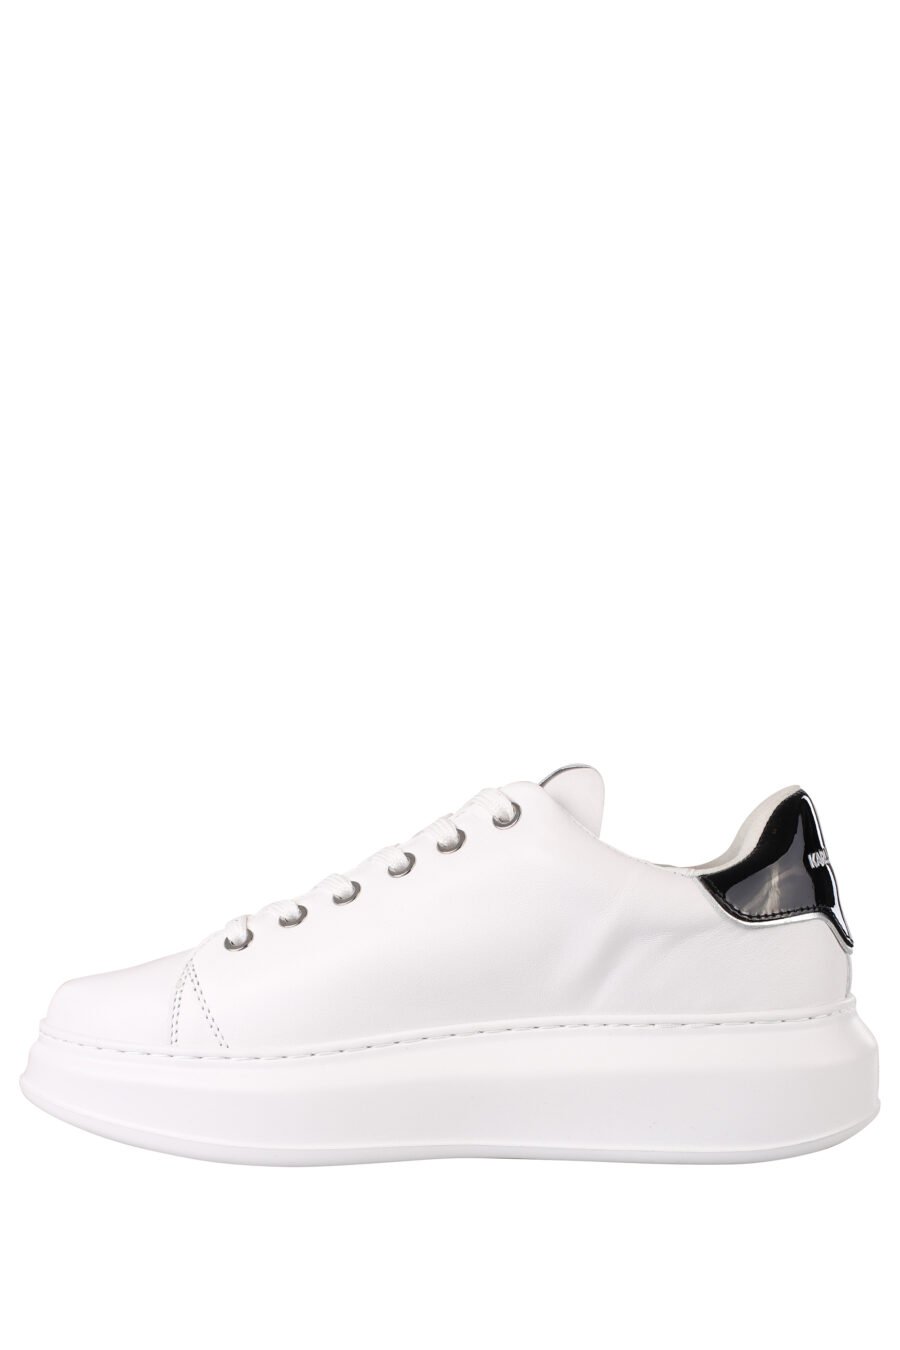 White trainers with silver metal logo - IMG 1349